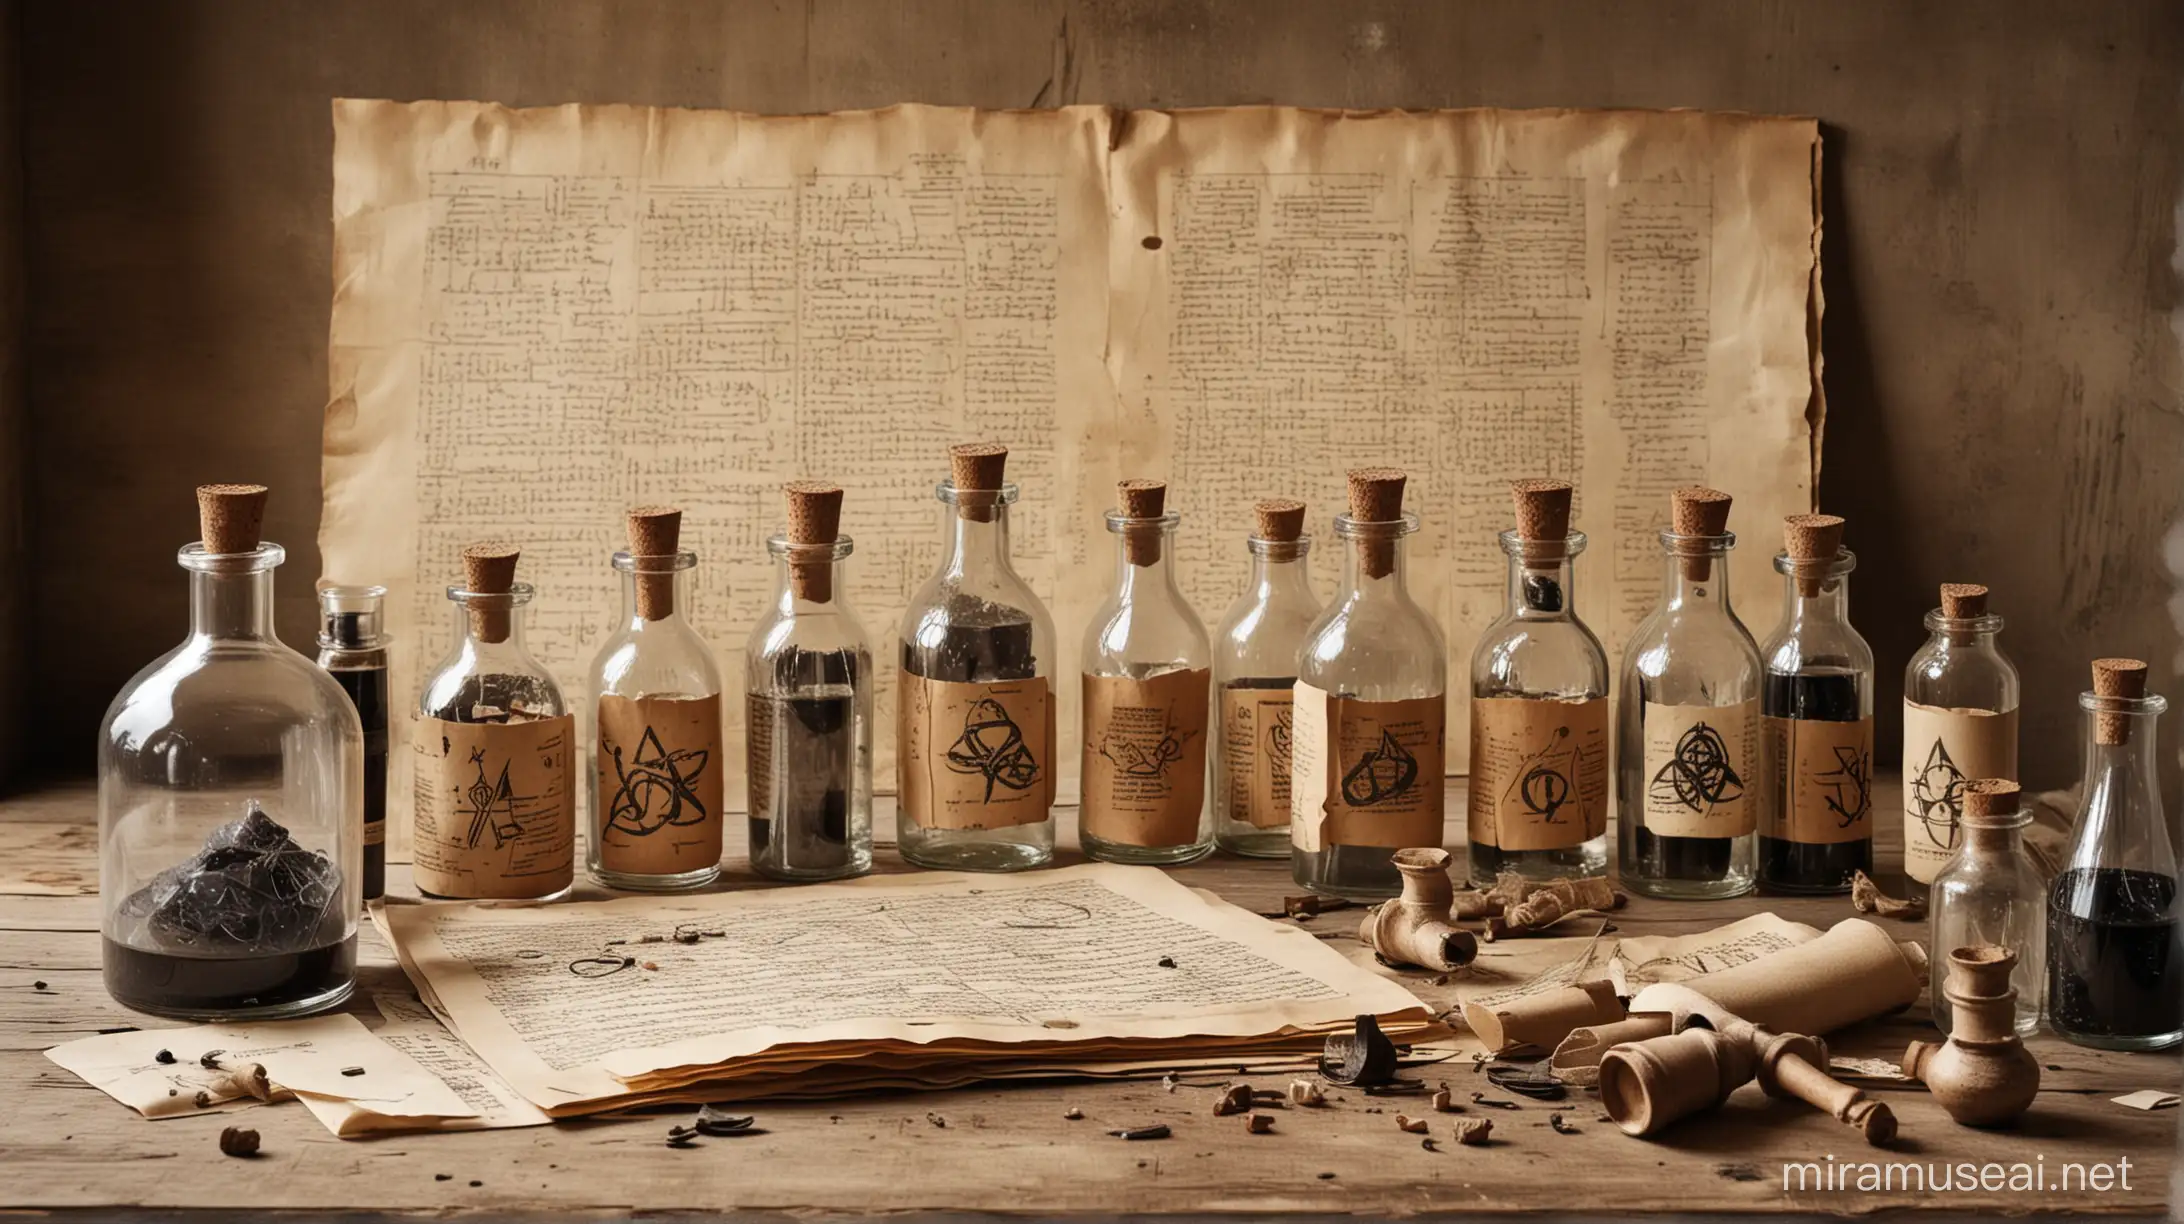 Mystical Alchemy Lab with Vintage Bottles and Enigmatic Symbols